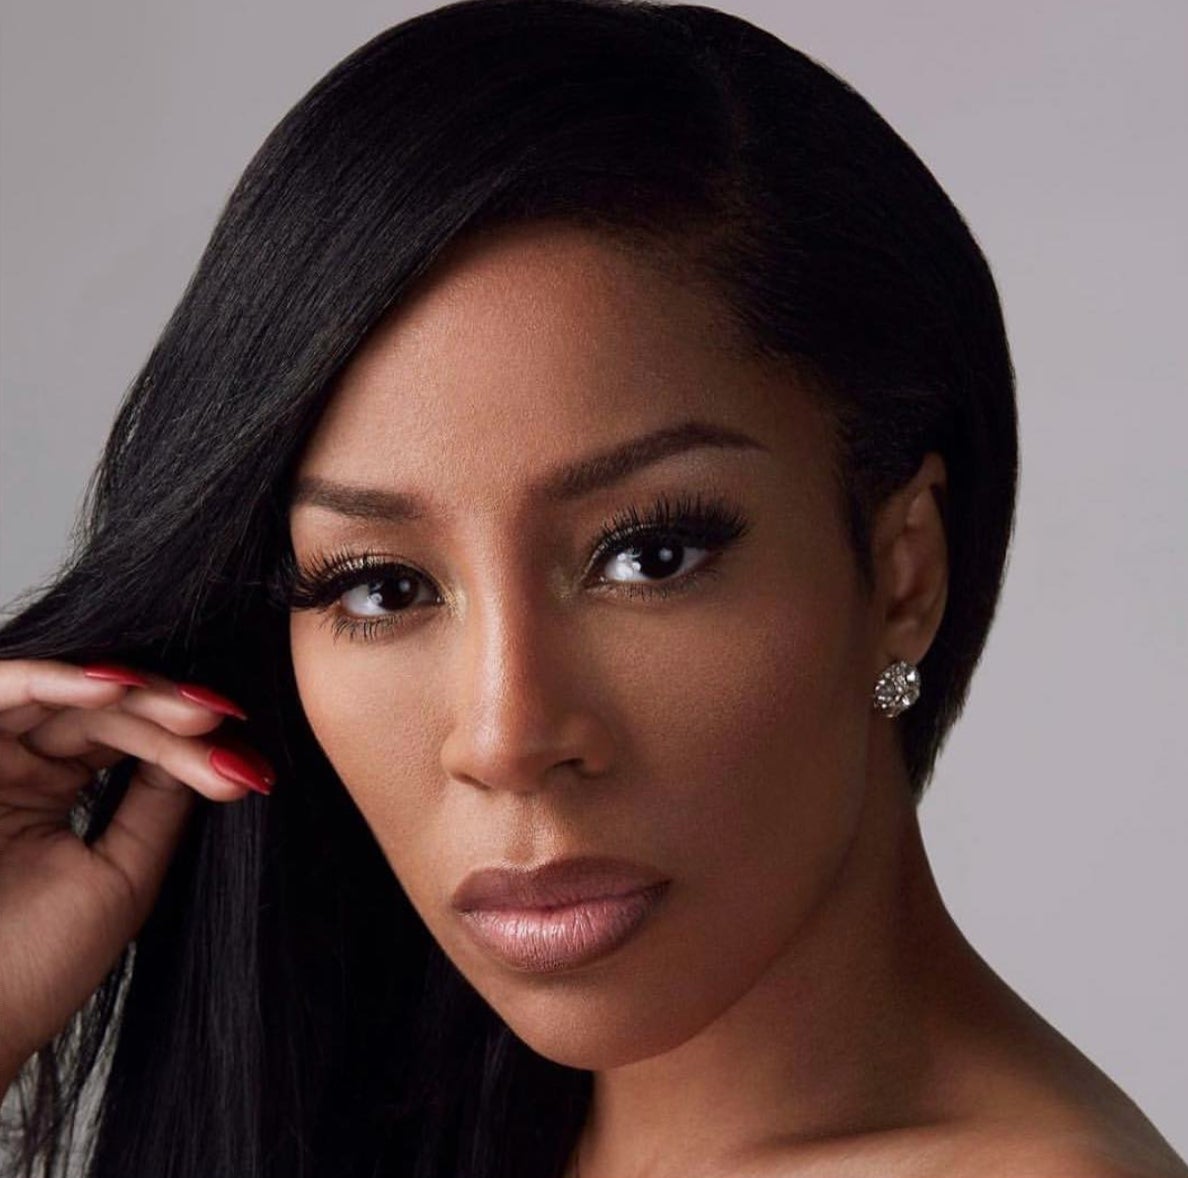 K. Michelle Opens Up About Why She's Starting IVF Fertility Treatment to Have Twin Girls
